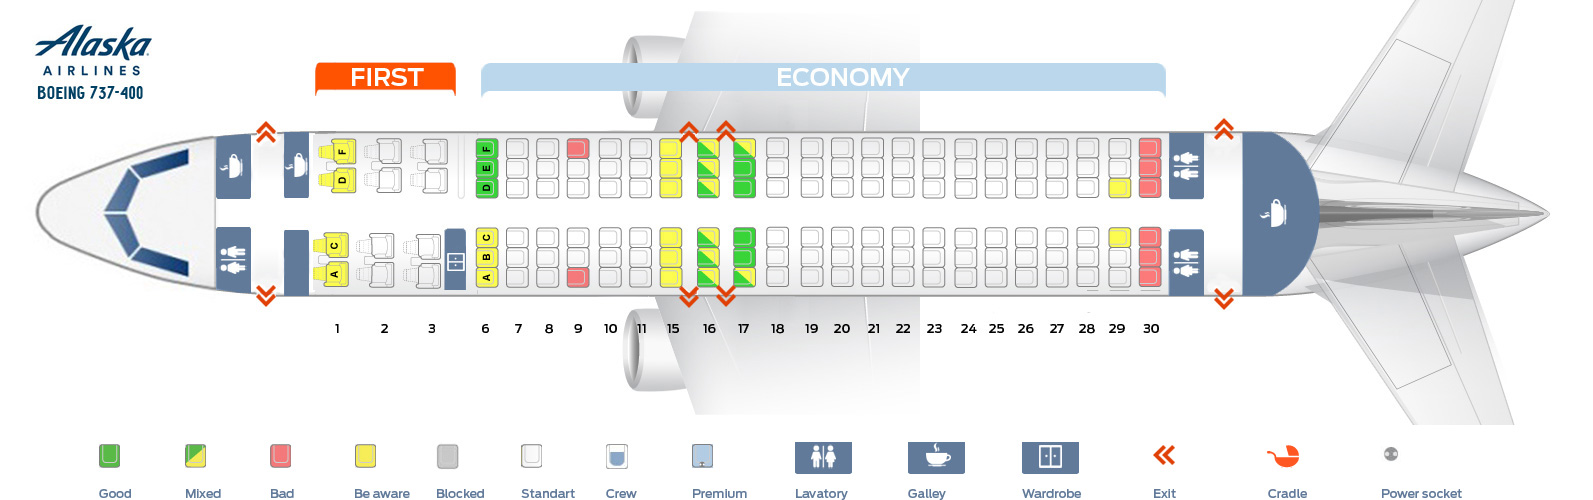 Boeing 737 400 Seating Chart